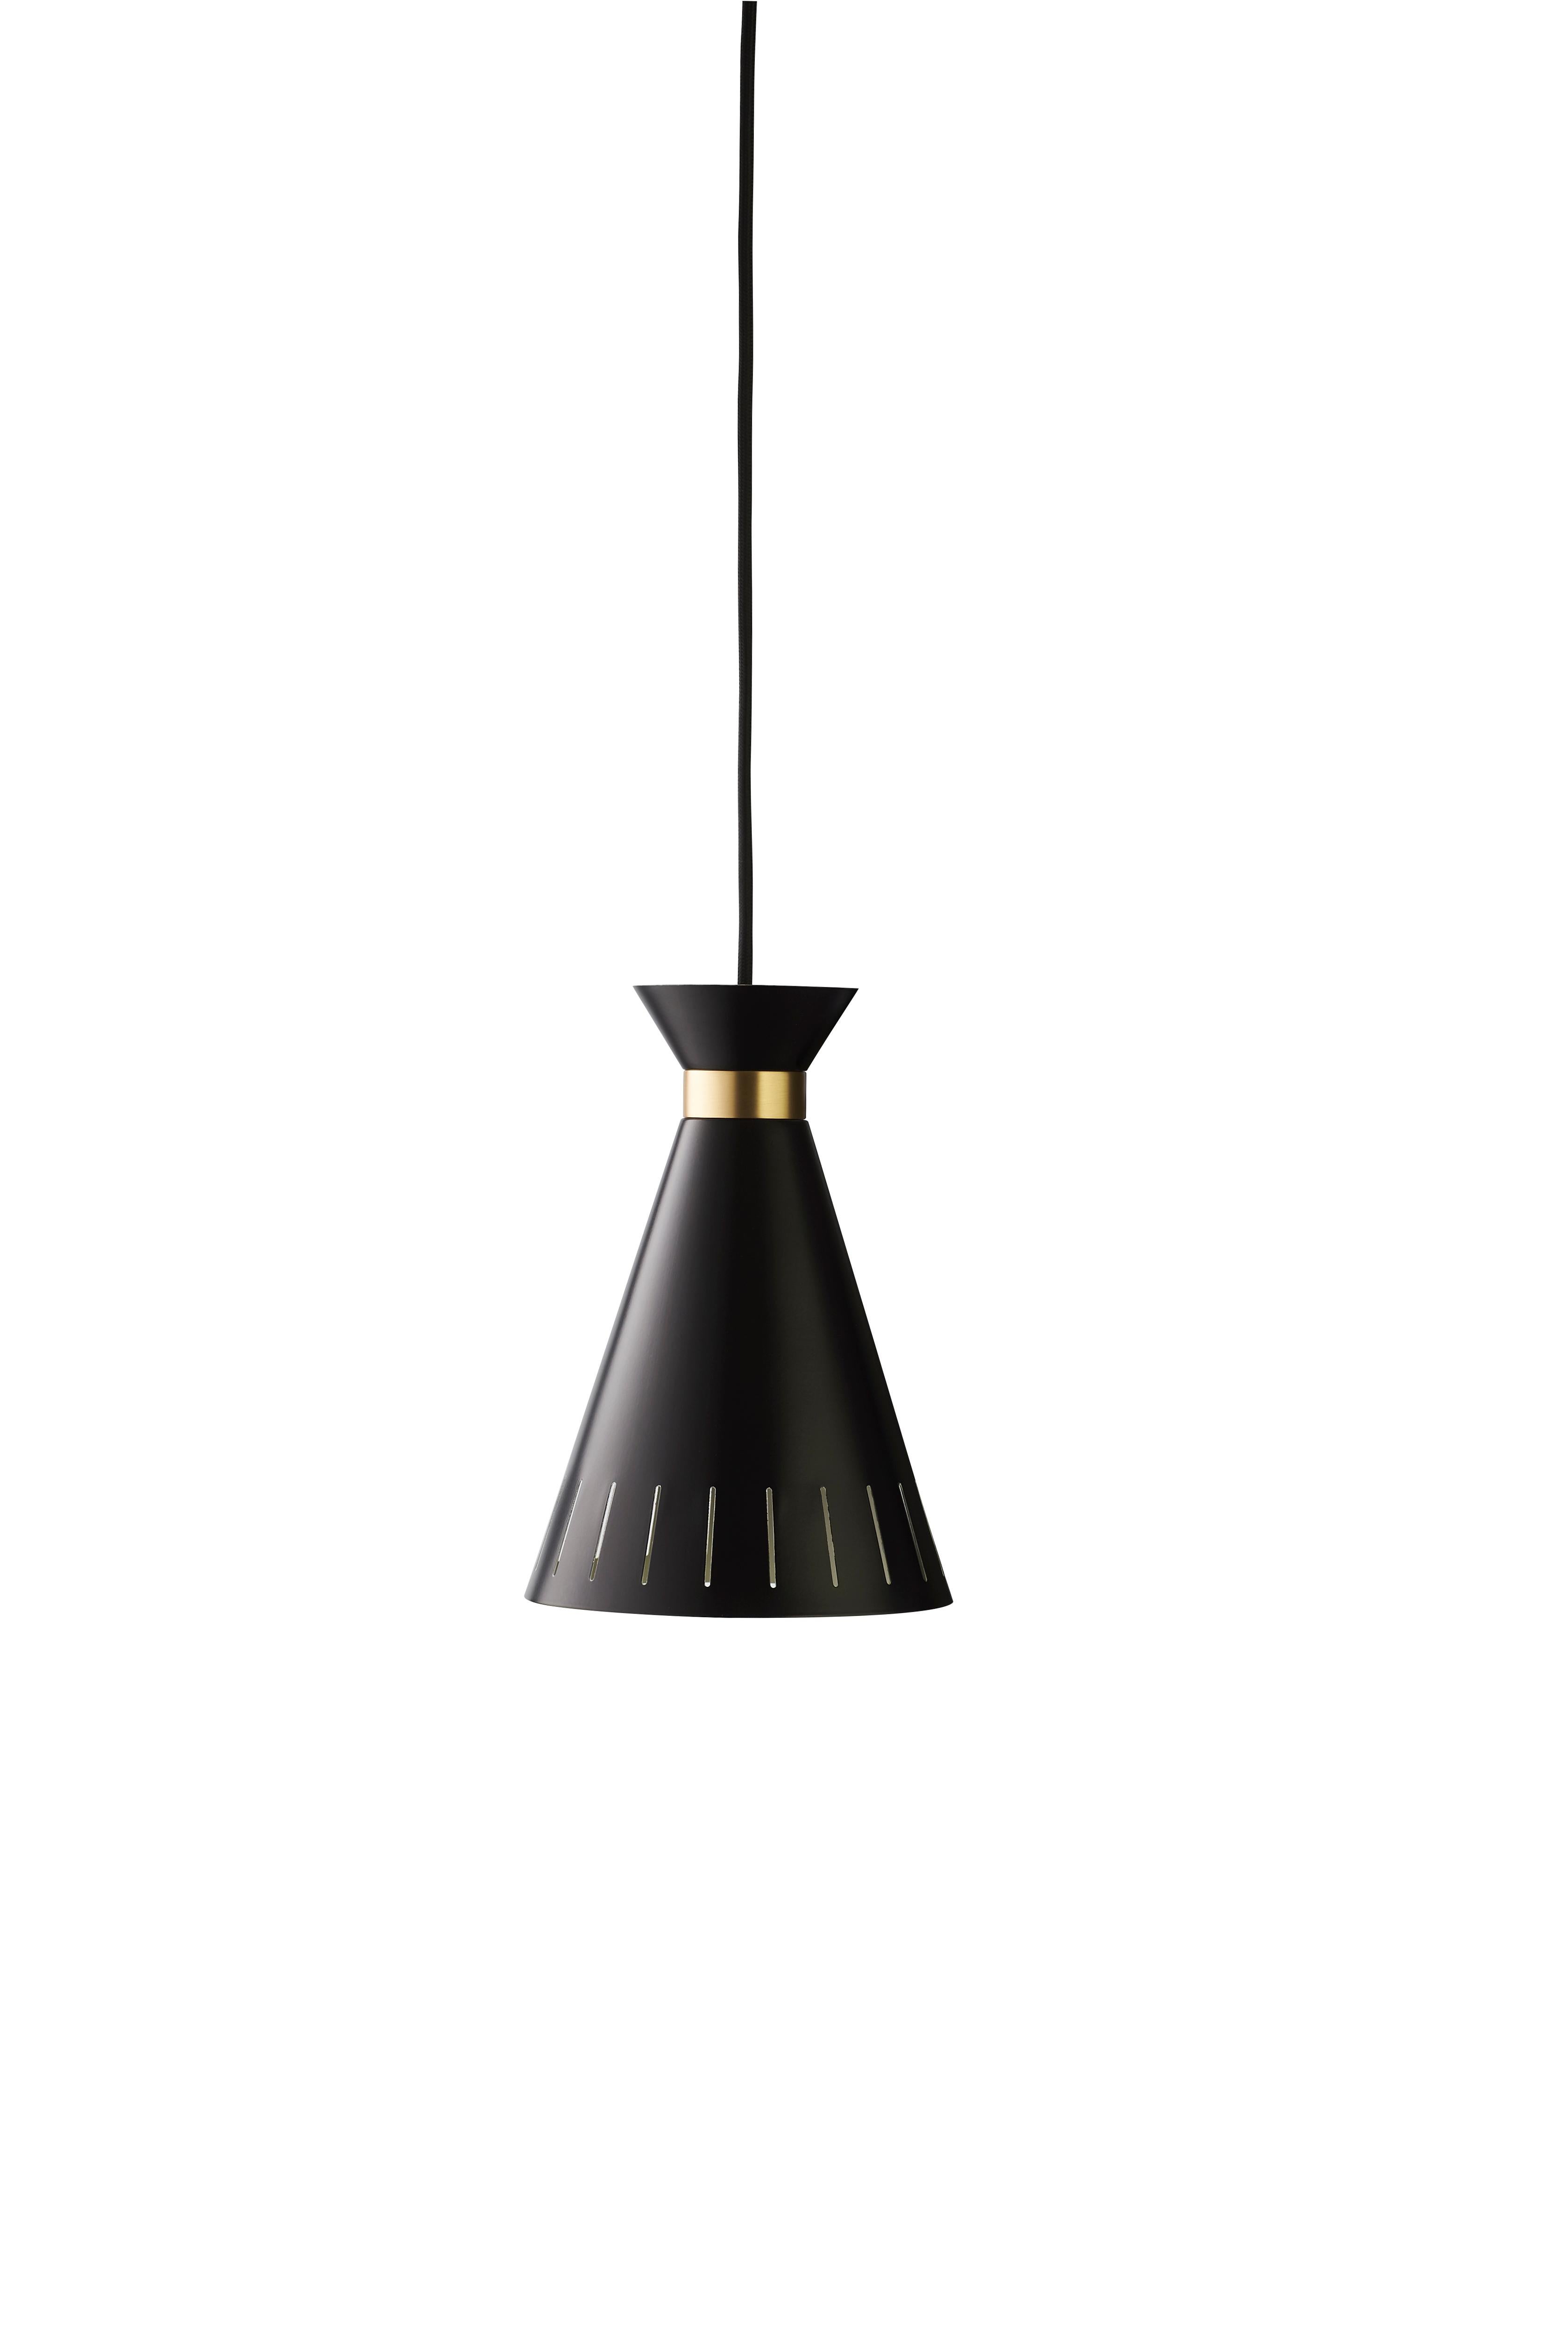 For Sale: Black Cone Pendant, by Svend Aage Holm-Sørensen from Warm Nordic